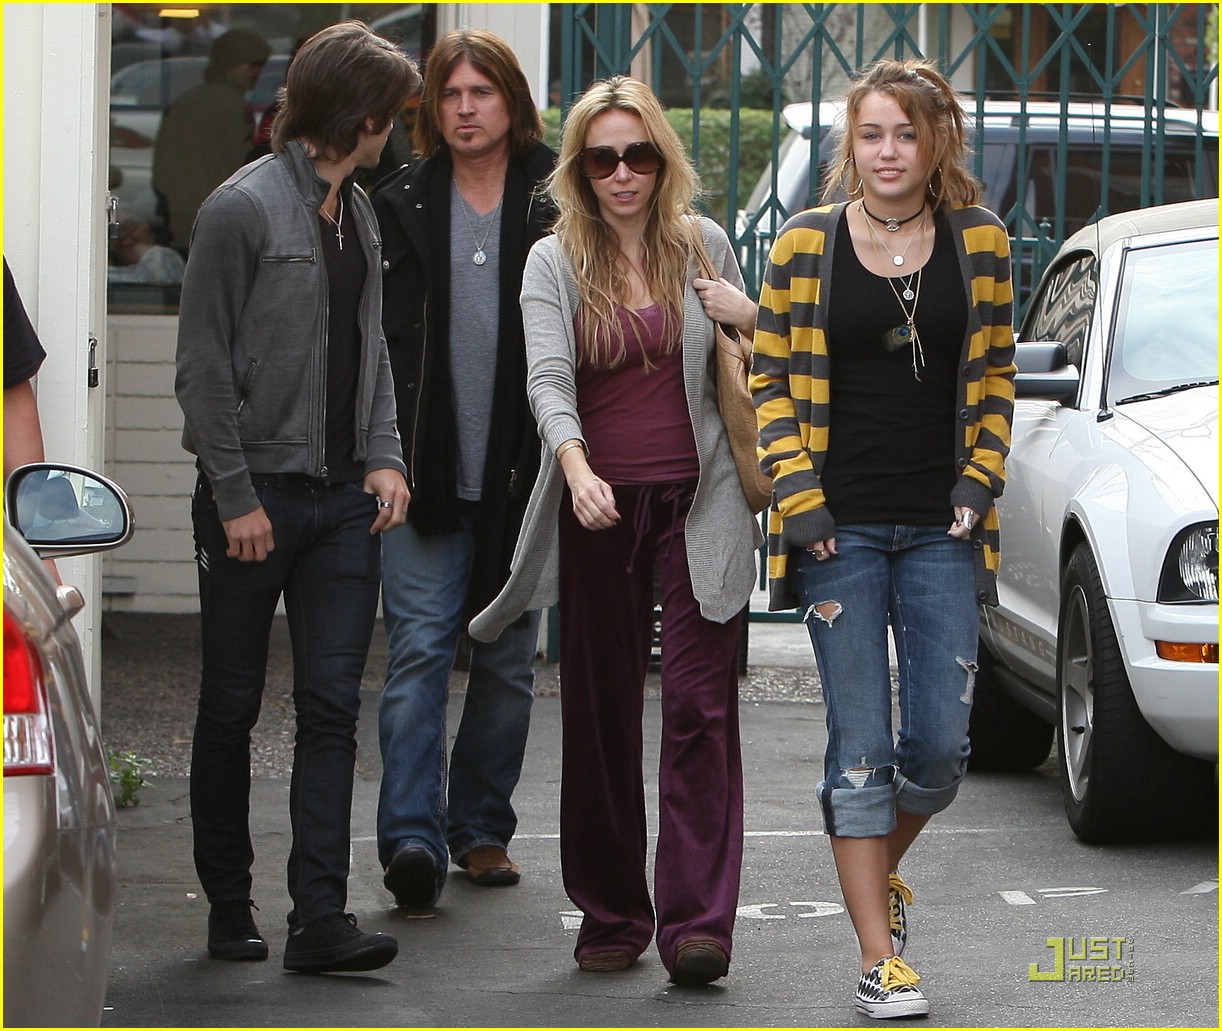 miley cyrus family paty lunch 14